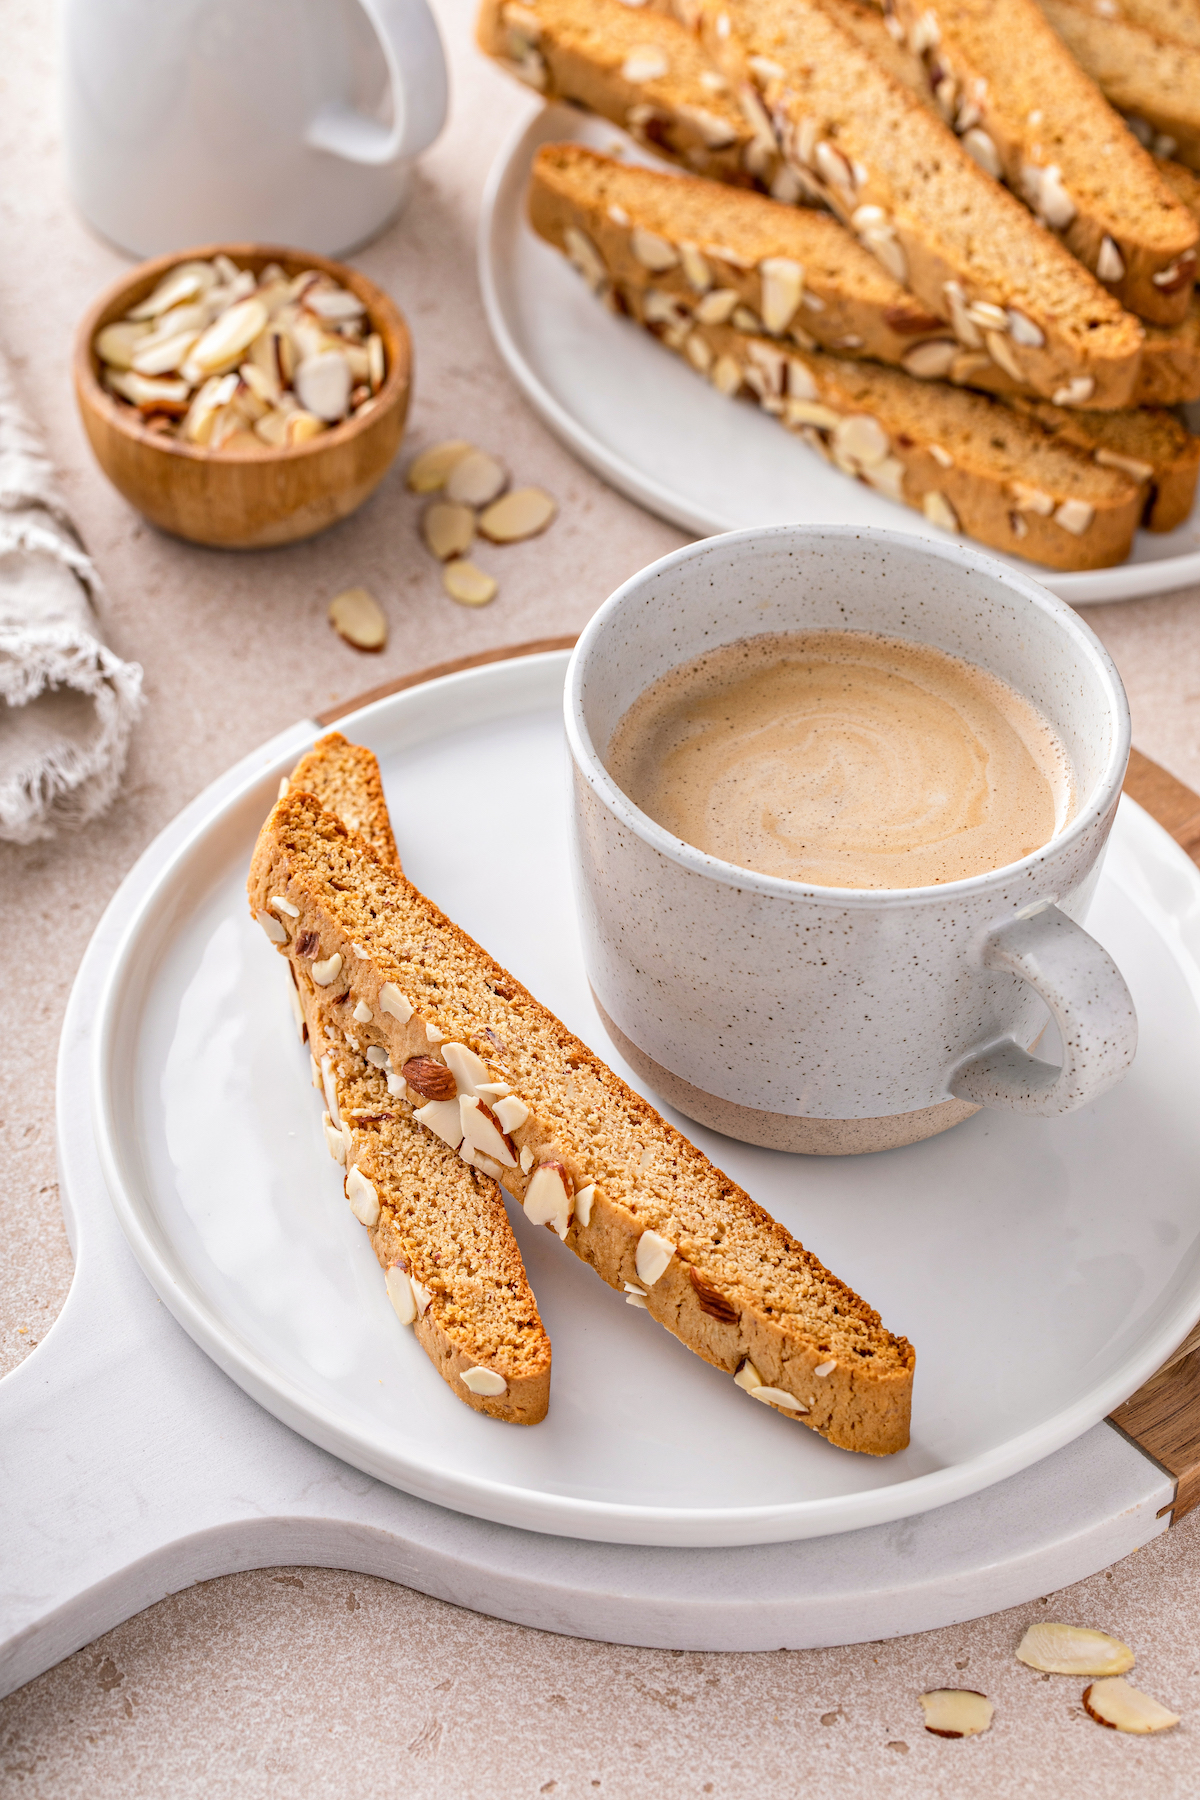 Two biscotti on a plate next to a small cup of coffee.